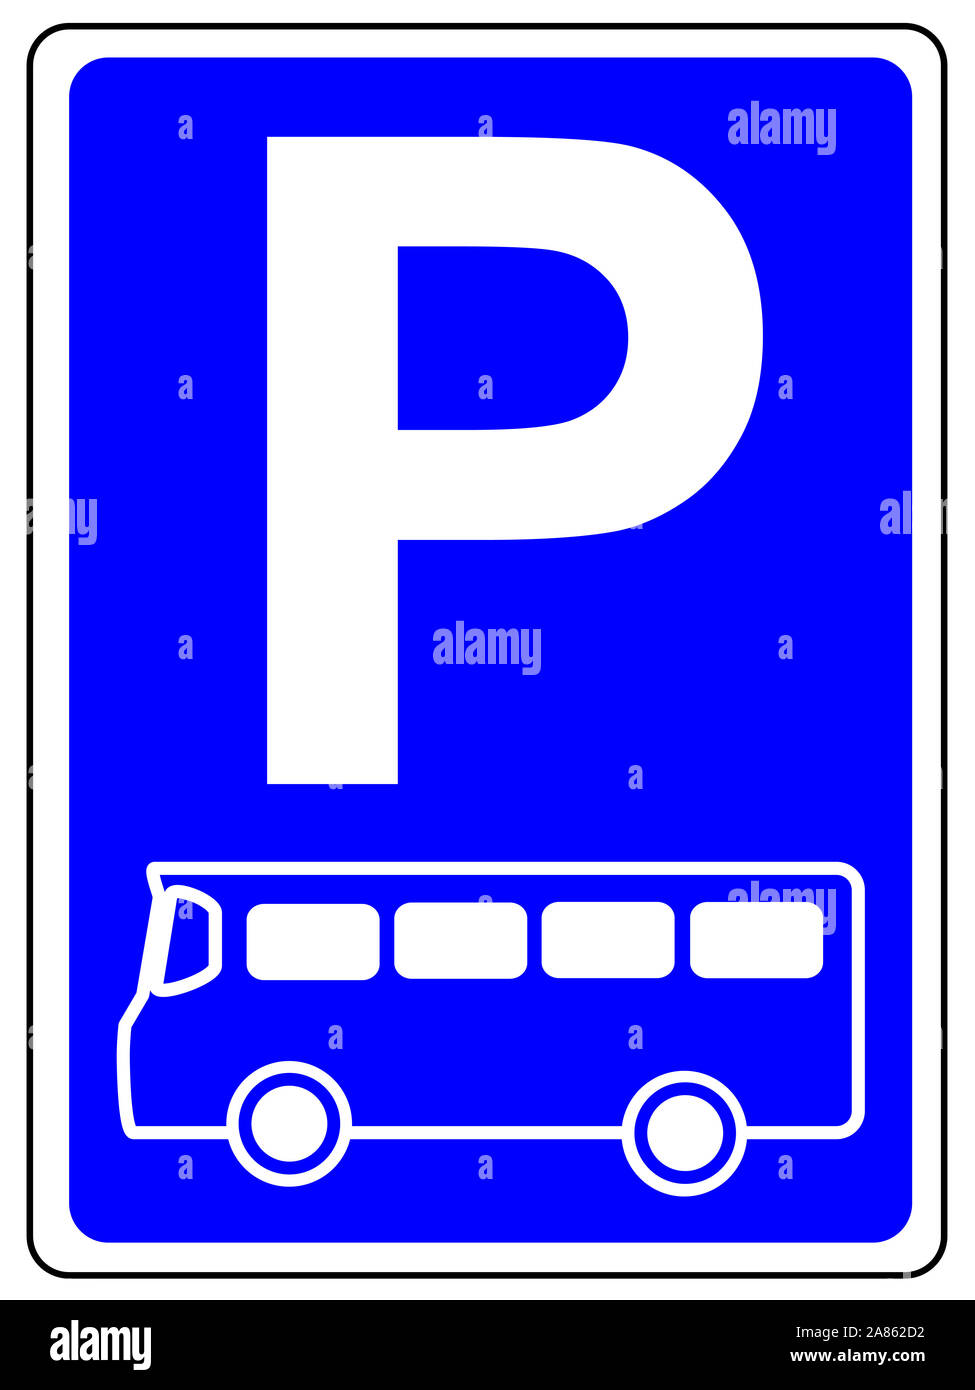 Parking space sign German Bus Stock Photo - Alamy